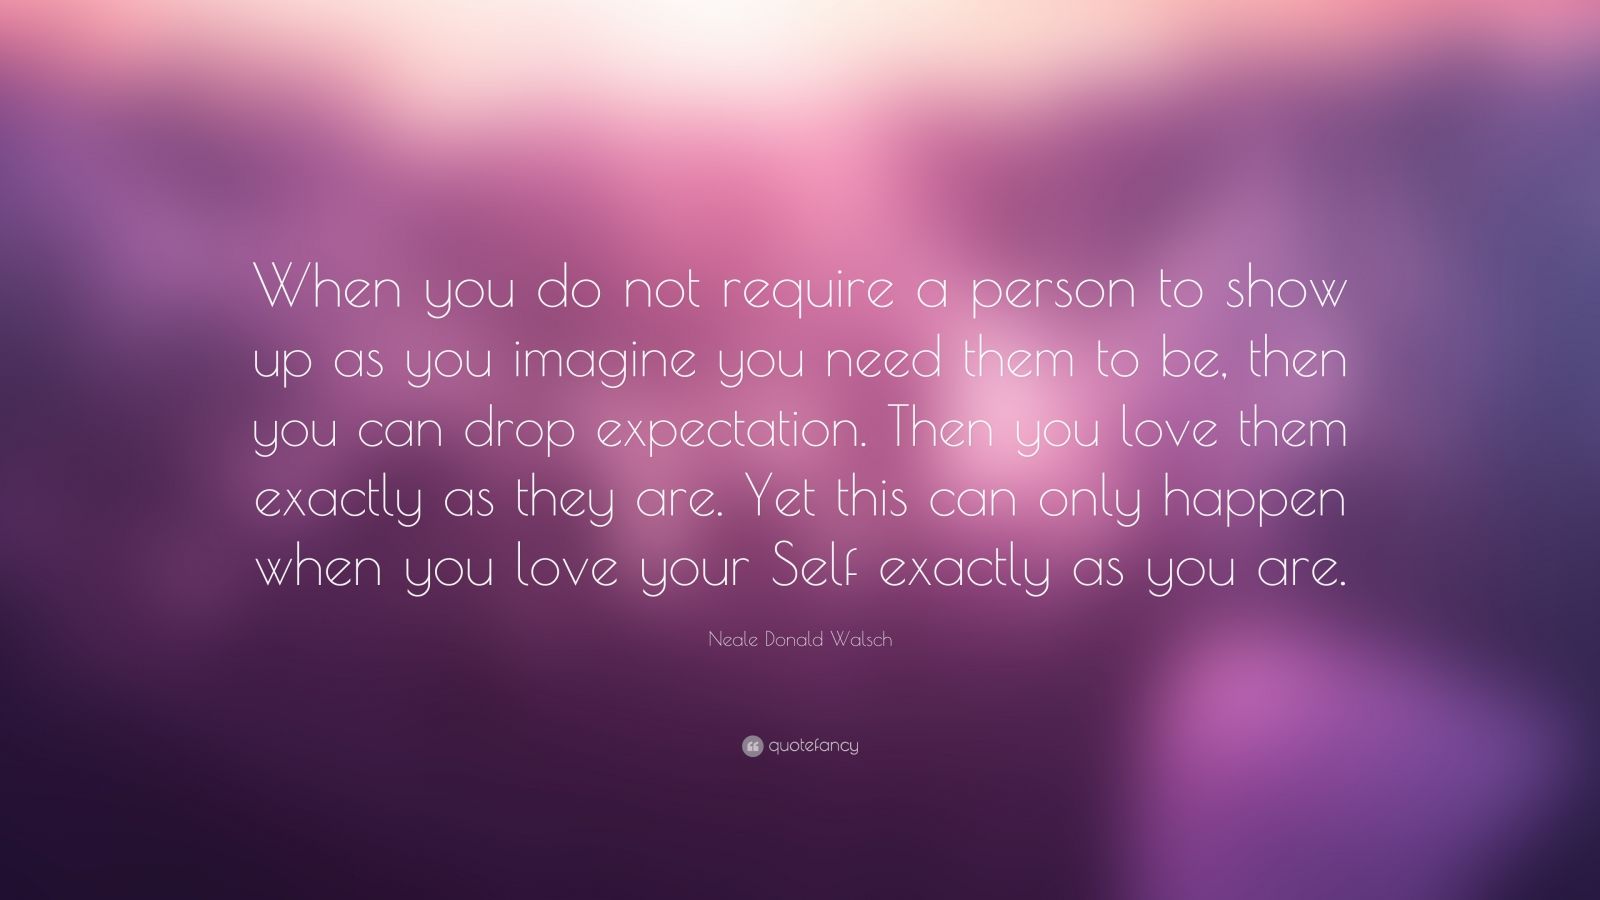 Neale Donald Walsch Quote: “When you do not require a person to show up ...